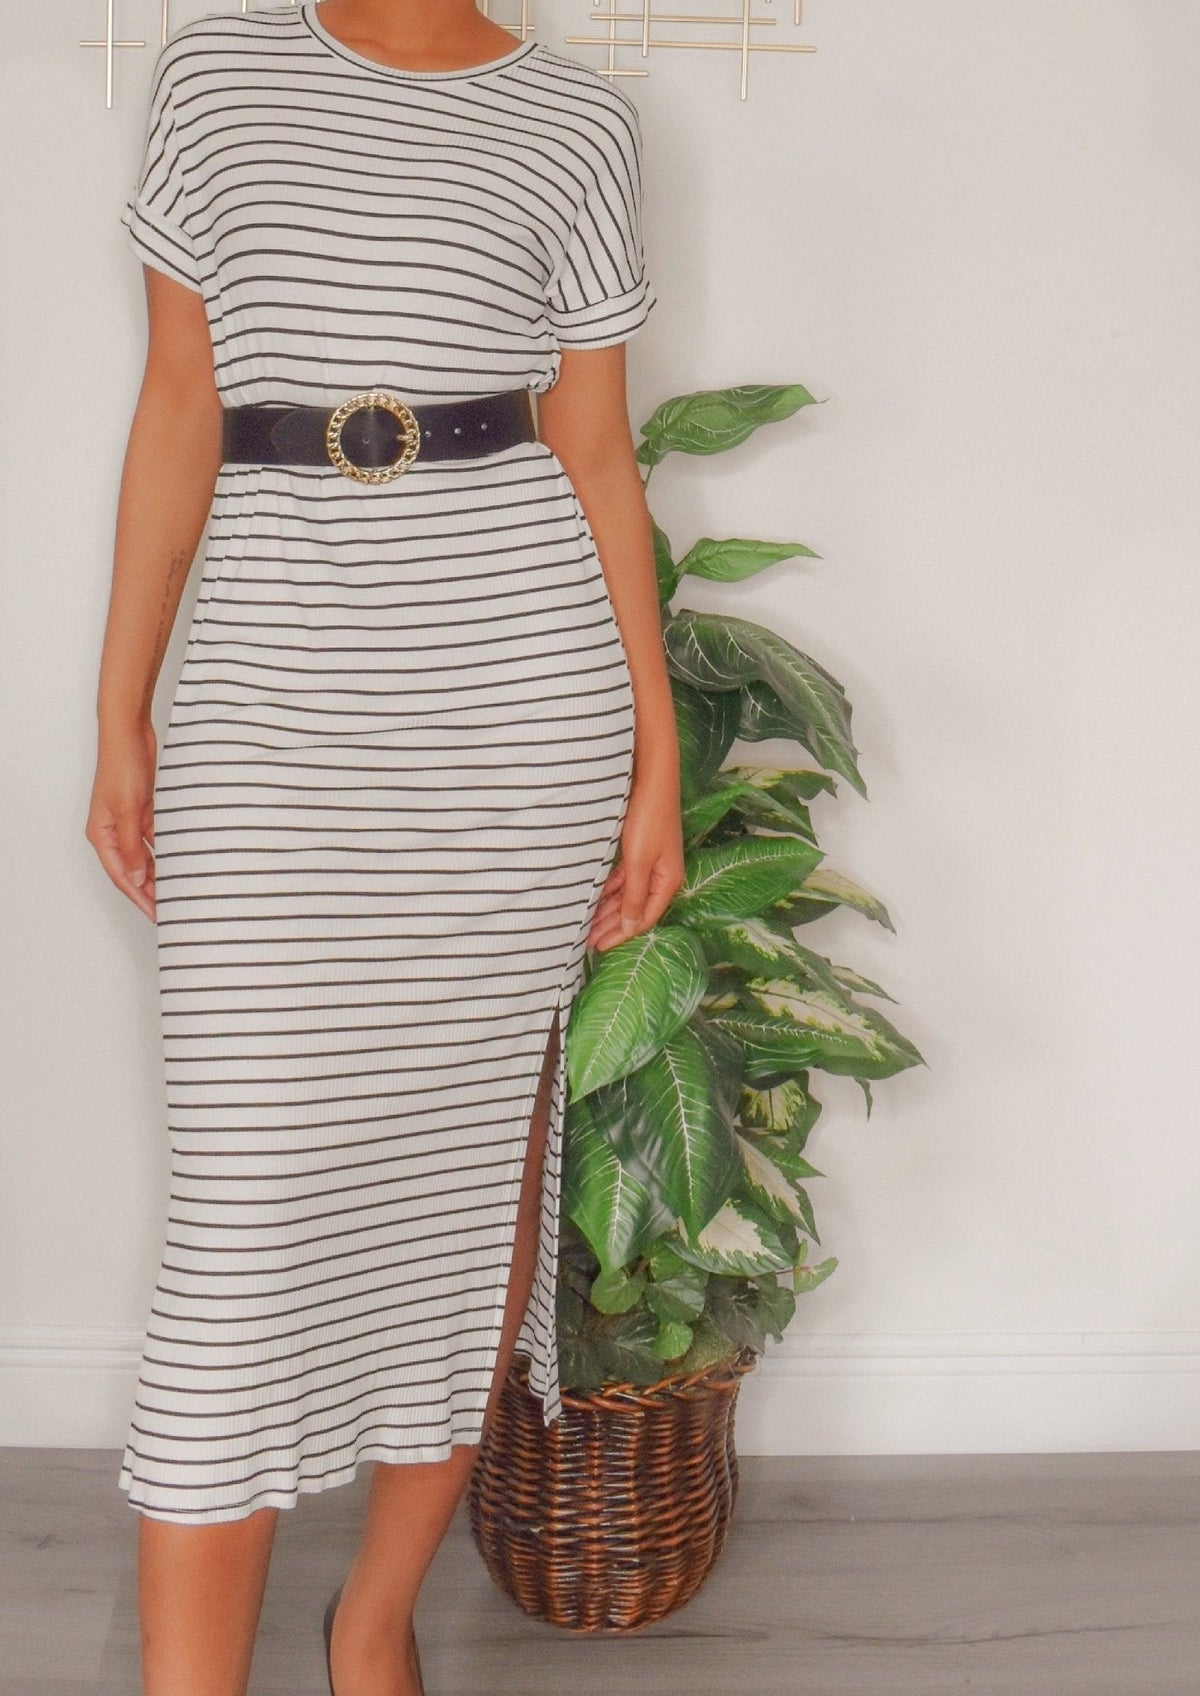 Get trendy with Striped Split Dress - Dresses available at ELLE TENAJ. Grab yours for $20.00 today!